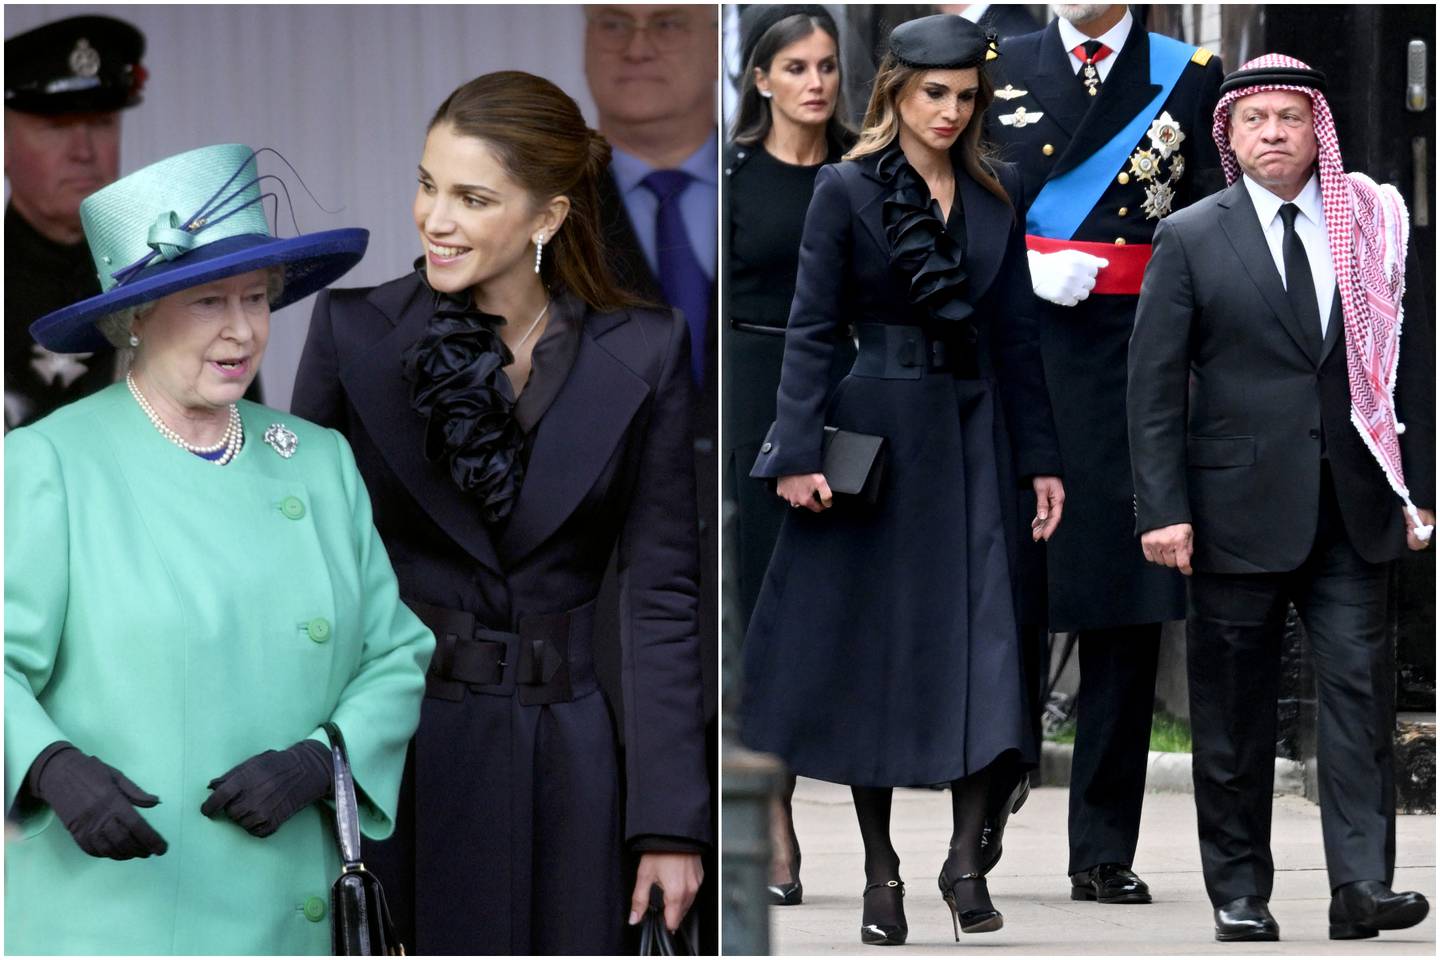 Left, Queen Rania of Jordan with Queen Elizabeth II in November 2001. Right, at the funeral of Queen Elizabeth with King Abdullah II. Photos: Getty Images, Royal Hashemite Court